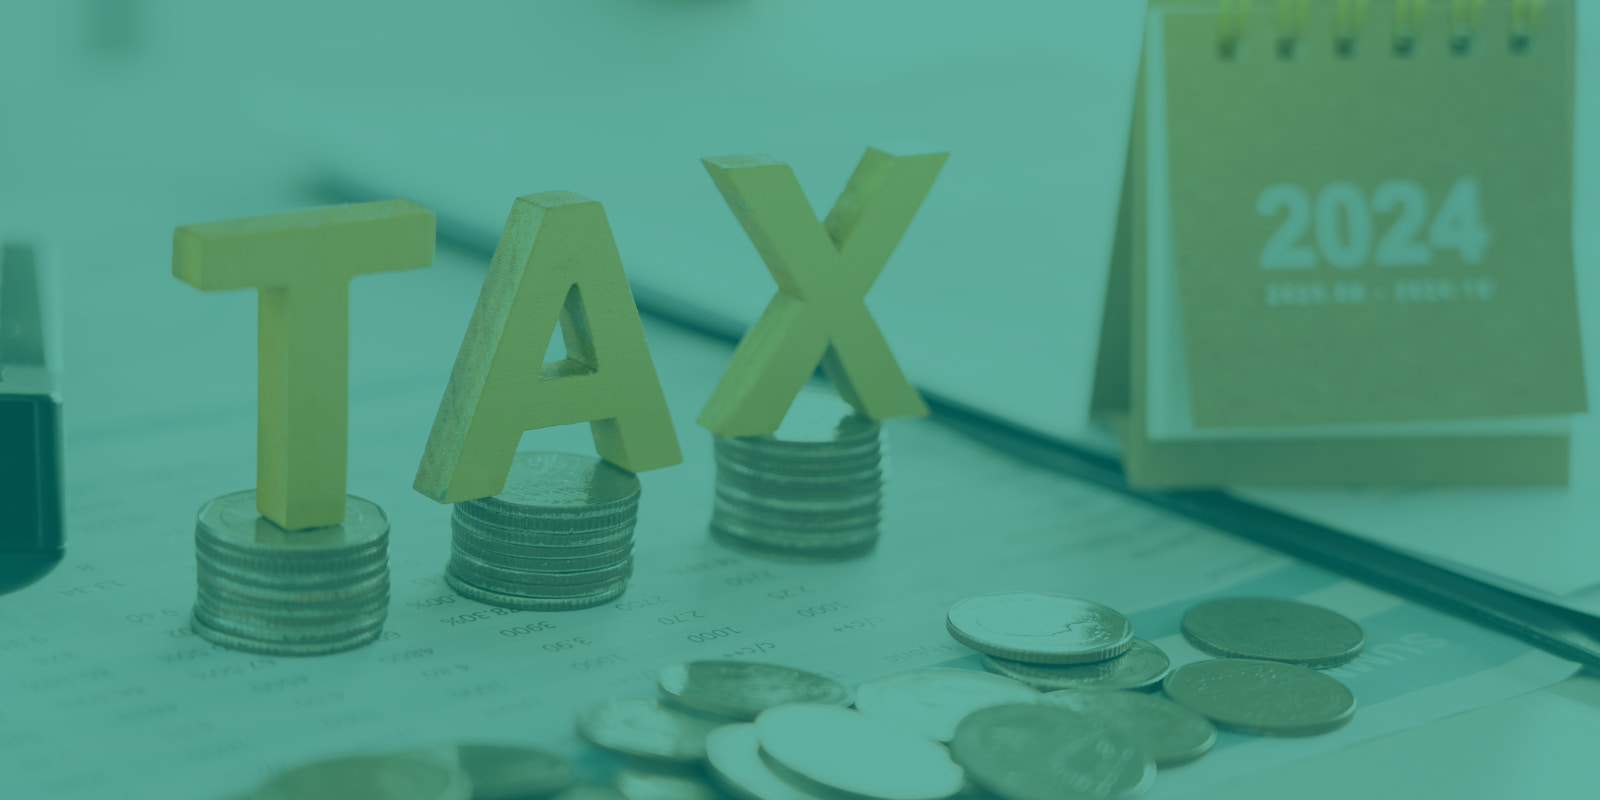 Federal Tax Authority (Fta) Update: New Corporate Tax Guide Released For Free Zone Businesses